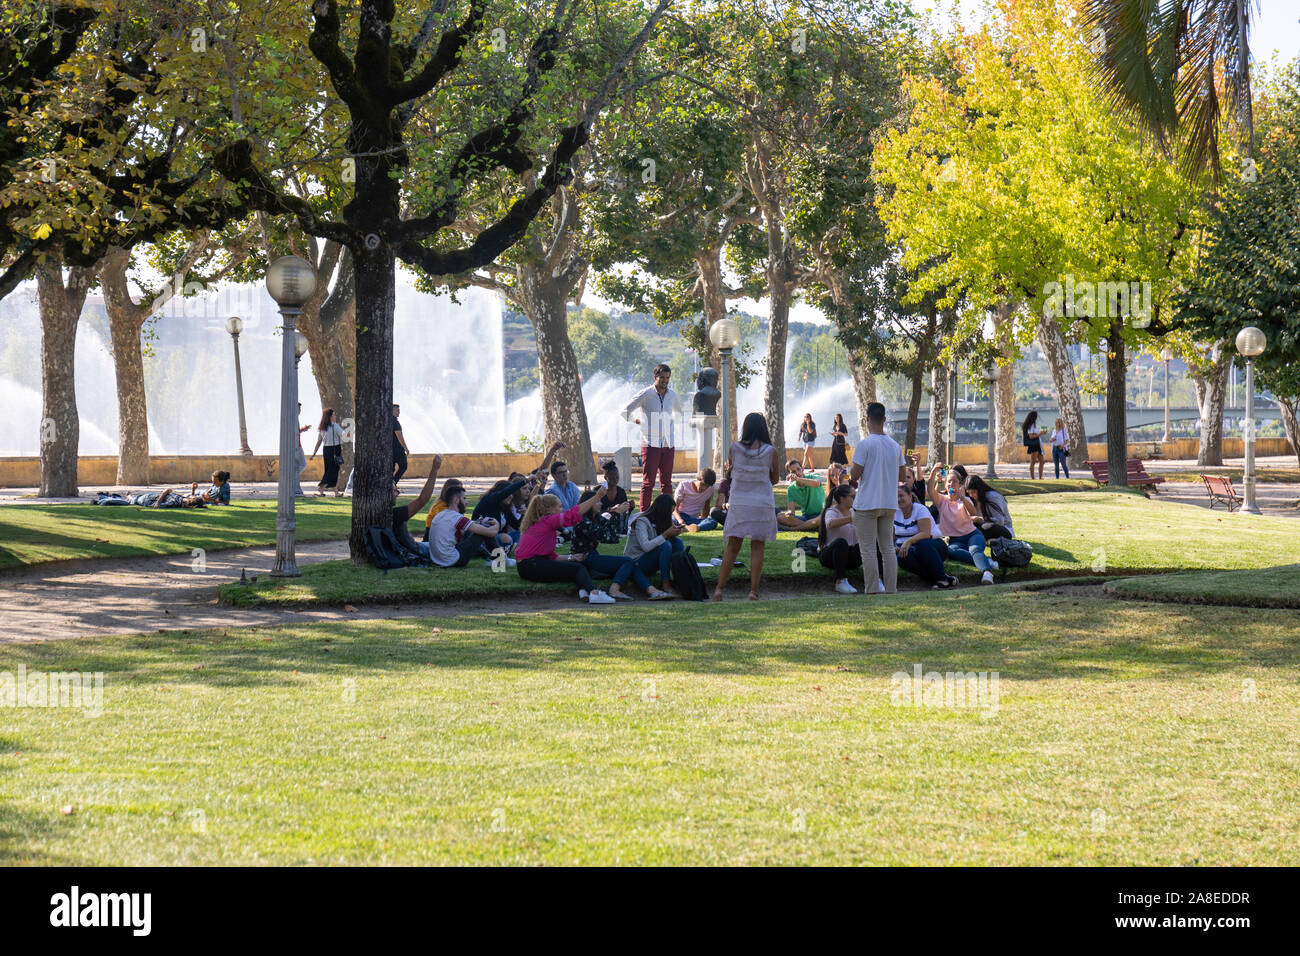 The University Town of Coimbra, Portugal.  Students enjoy a lecture in the park in the shade of the trees Stock Photo